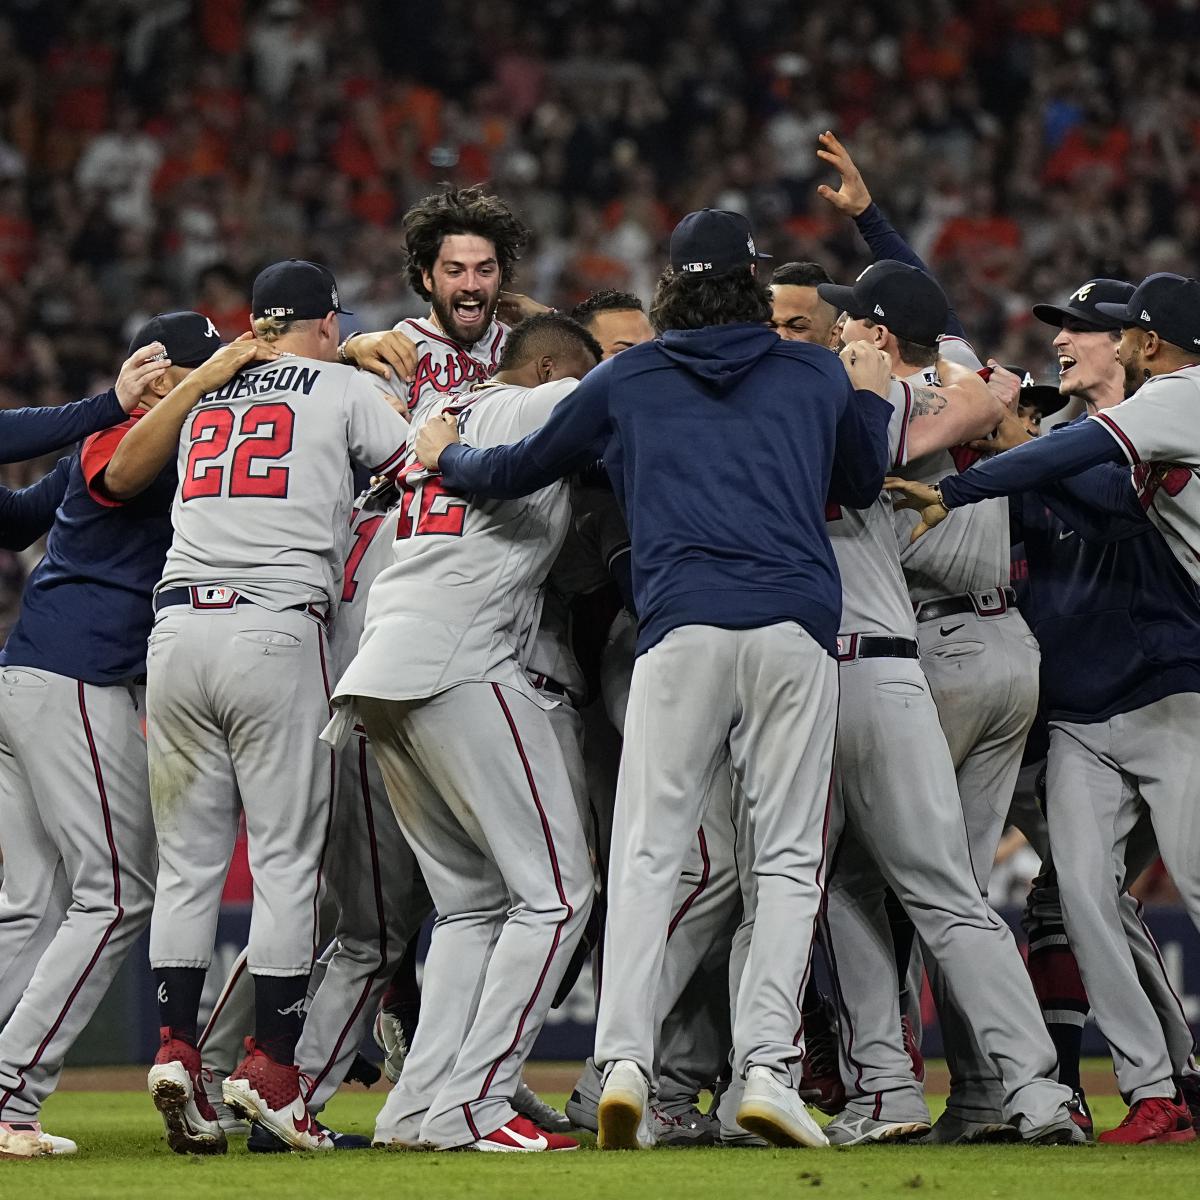 Braves World Series parade plan: Routes, start times, expectations